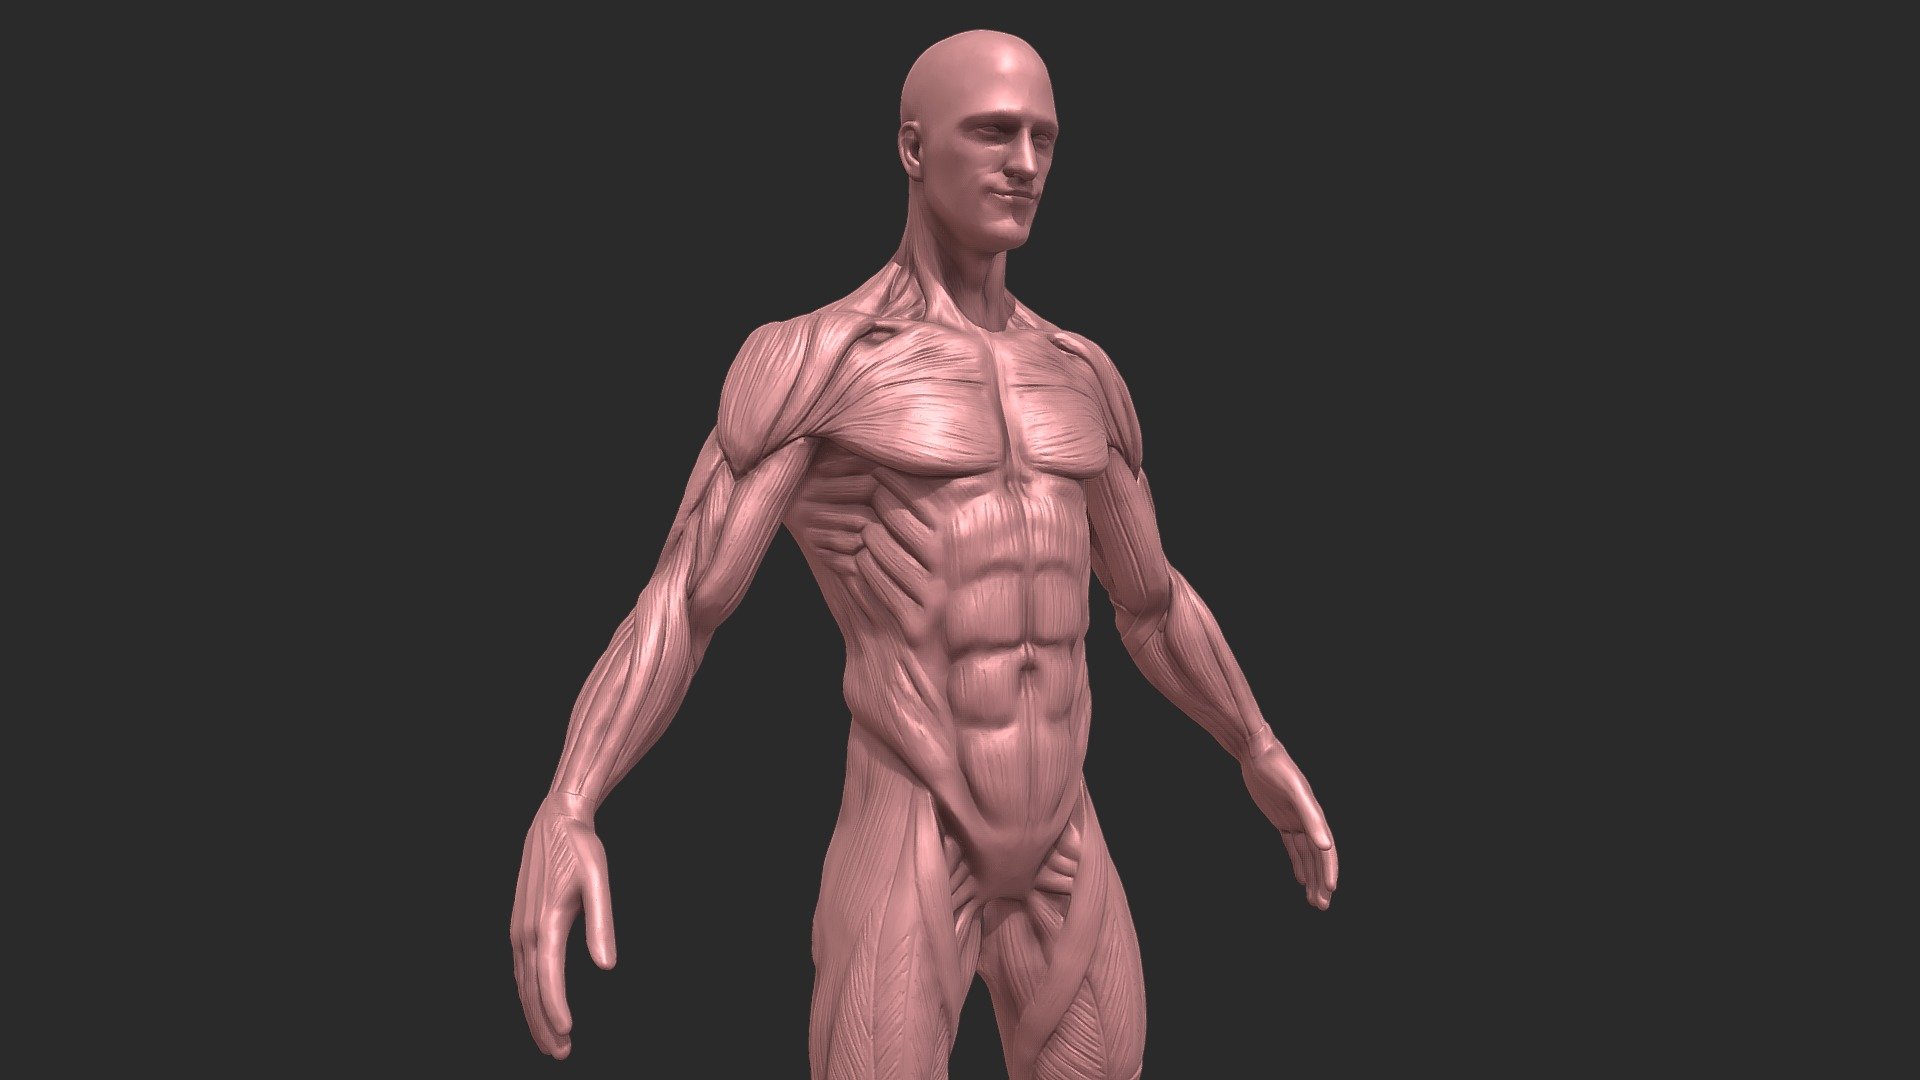 Great anatomy for study with high resolution, gold material and Clear black background make it realistic and so cute.

Recomended For:




Basic modeling

Rigging

Sculpting

Become Statue

Decorate

3D Print File

Toy

visualization

Have fun :) - Male Ecorche anatomy - Buy Royalty Free 3D model by Puppy3D 3d model